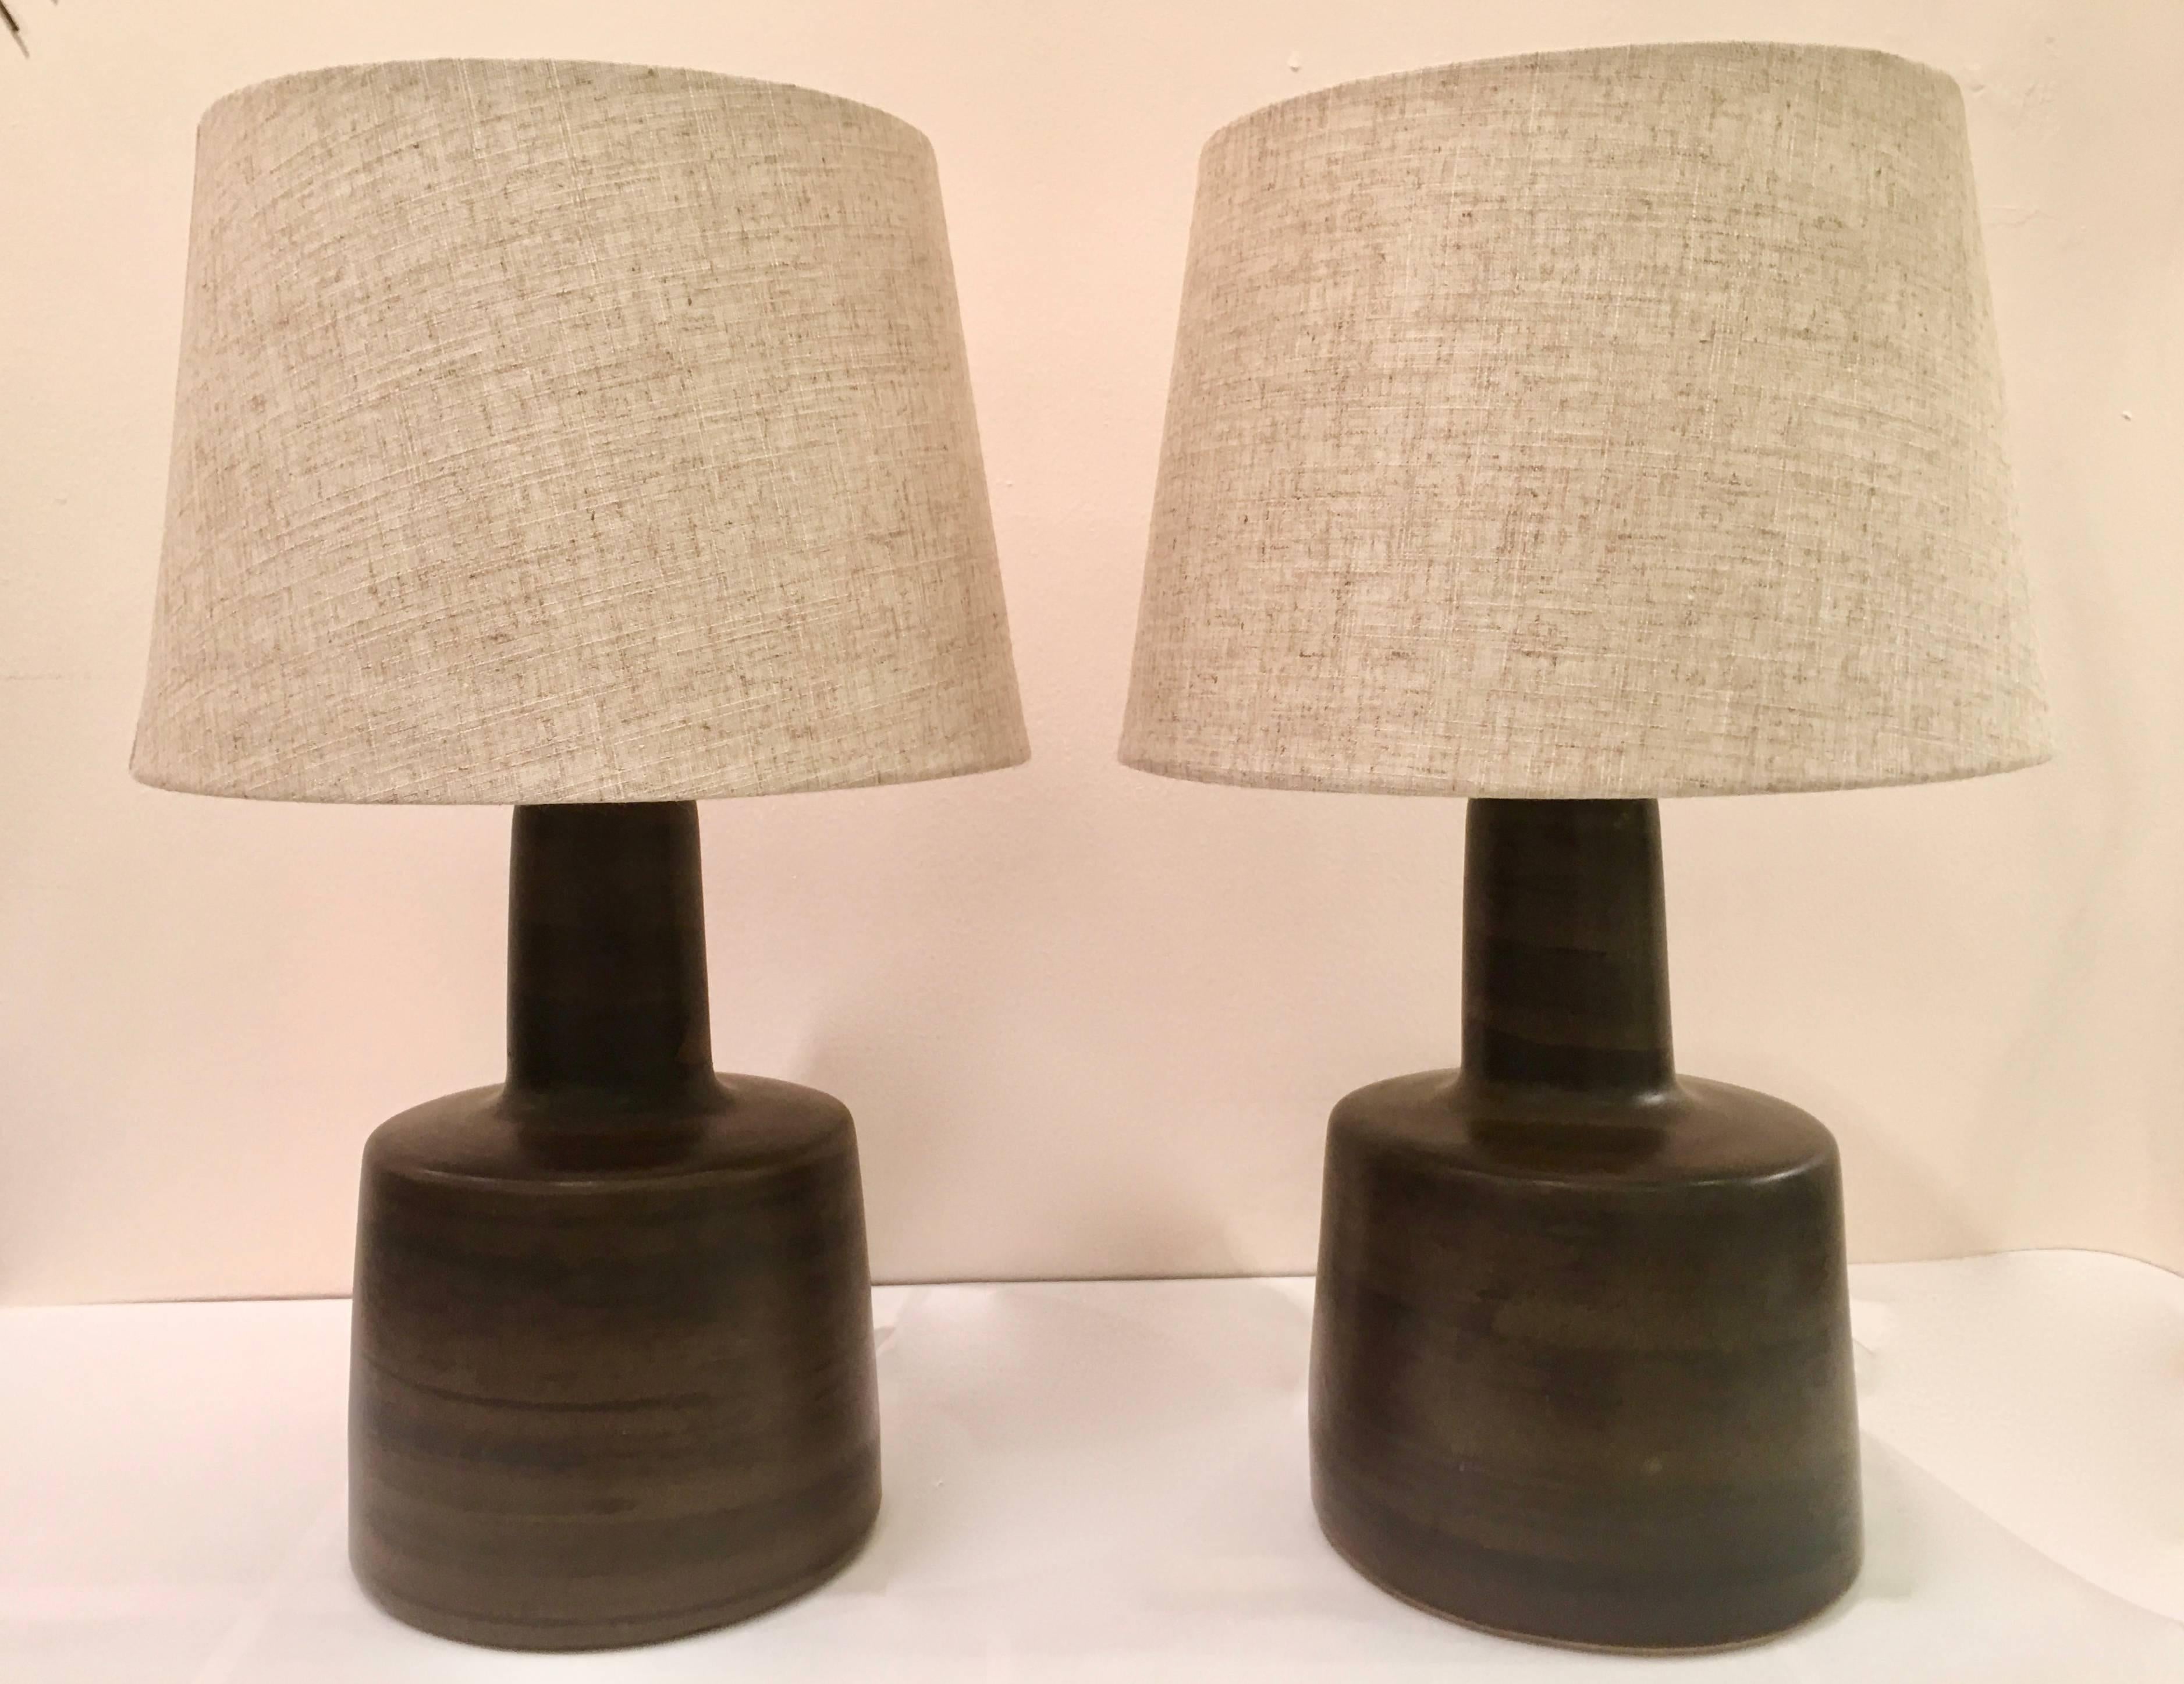 Handsome pair of Martz lamps finished in an attractive glaze with subtle patterns. The lamps are in a versatile small-scale. Please contact for location.  